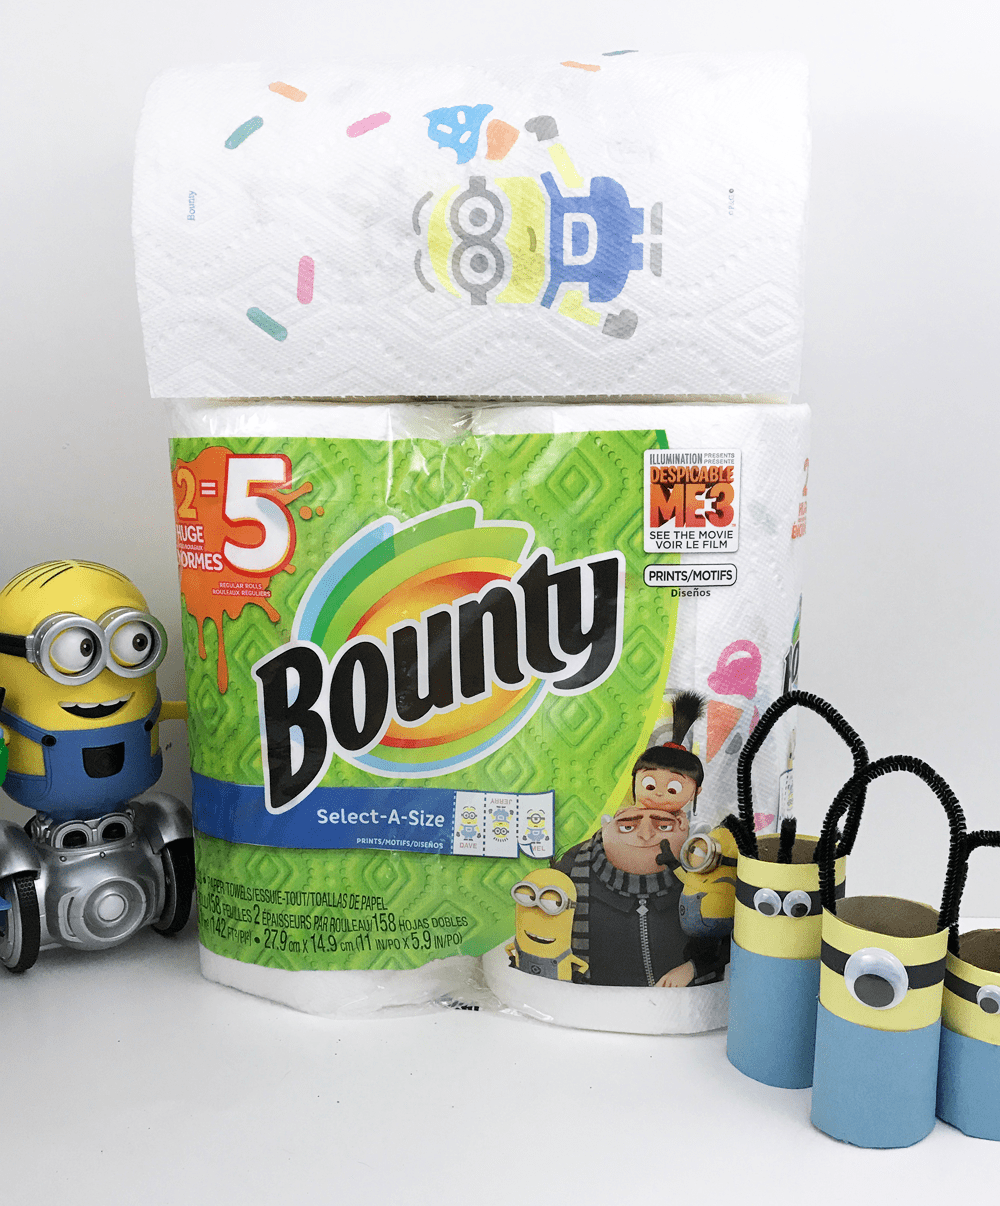 Diy: Easy And Cute Minions Snack Cups